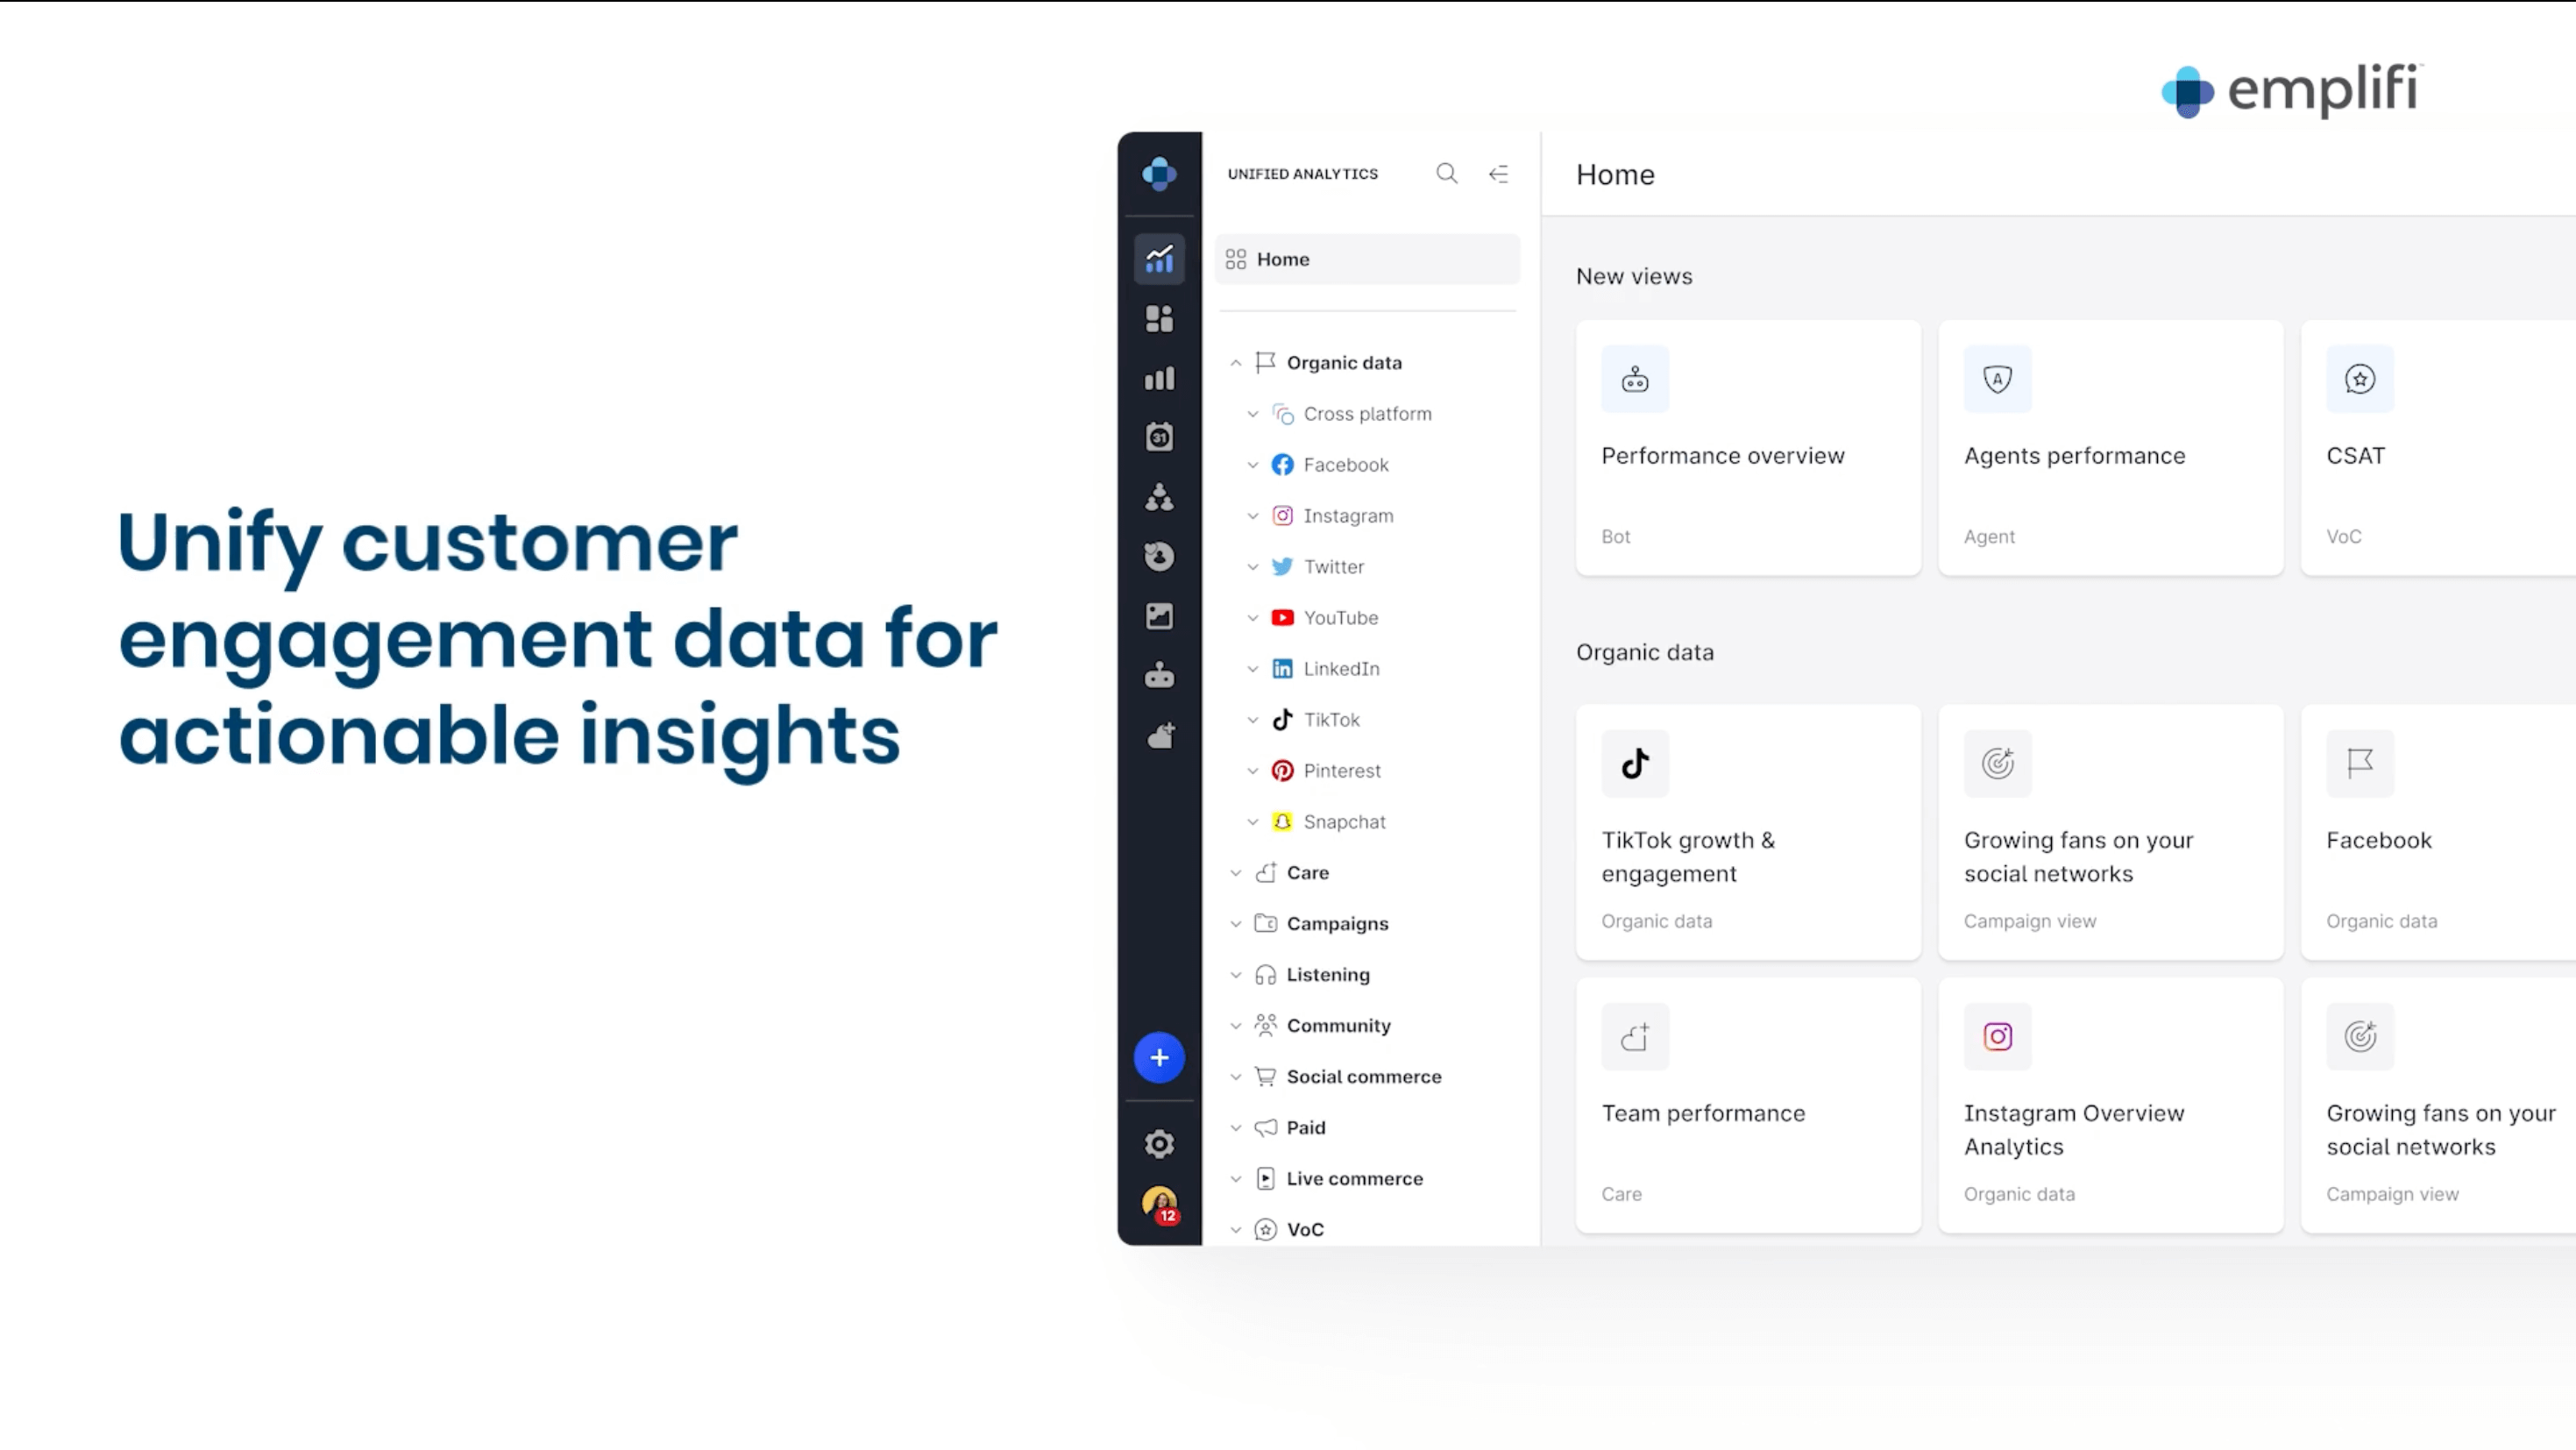 Emplifi dashboard displaying unified customer engagement data for actionable insights, with sections for performance overview, organic data, and social media analytics.